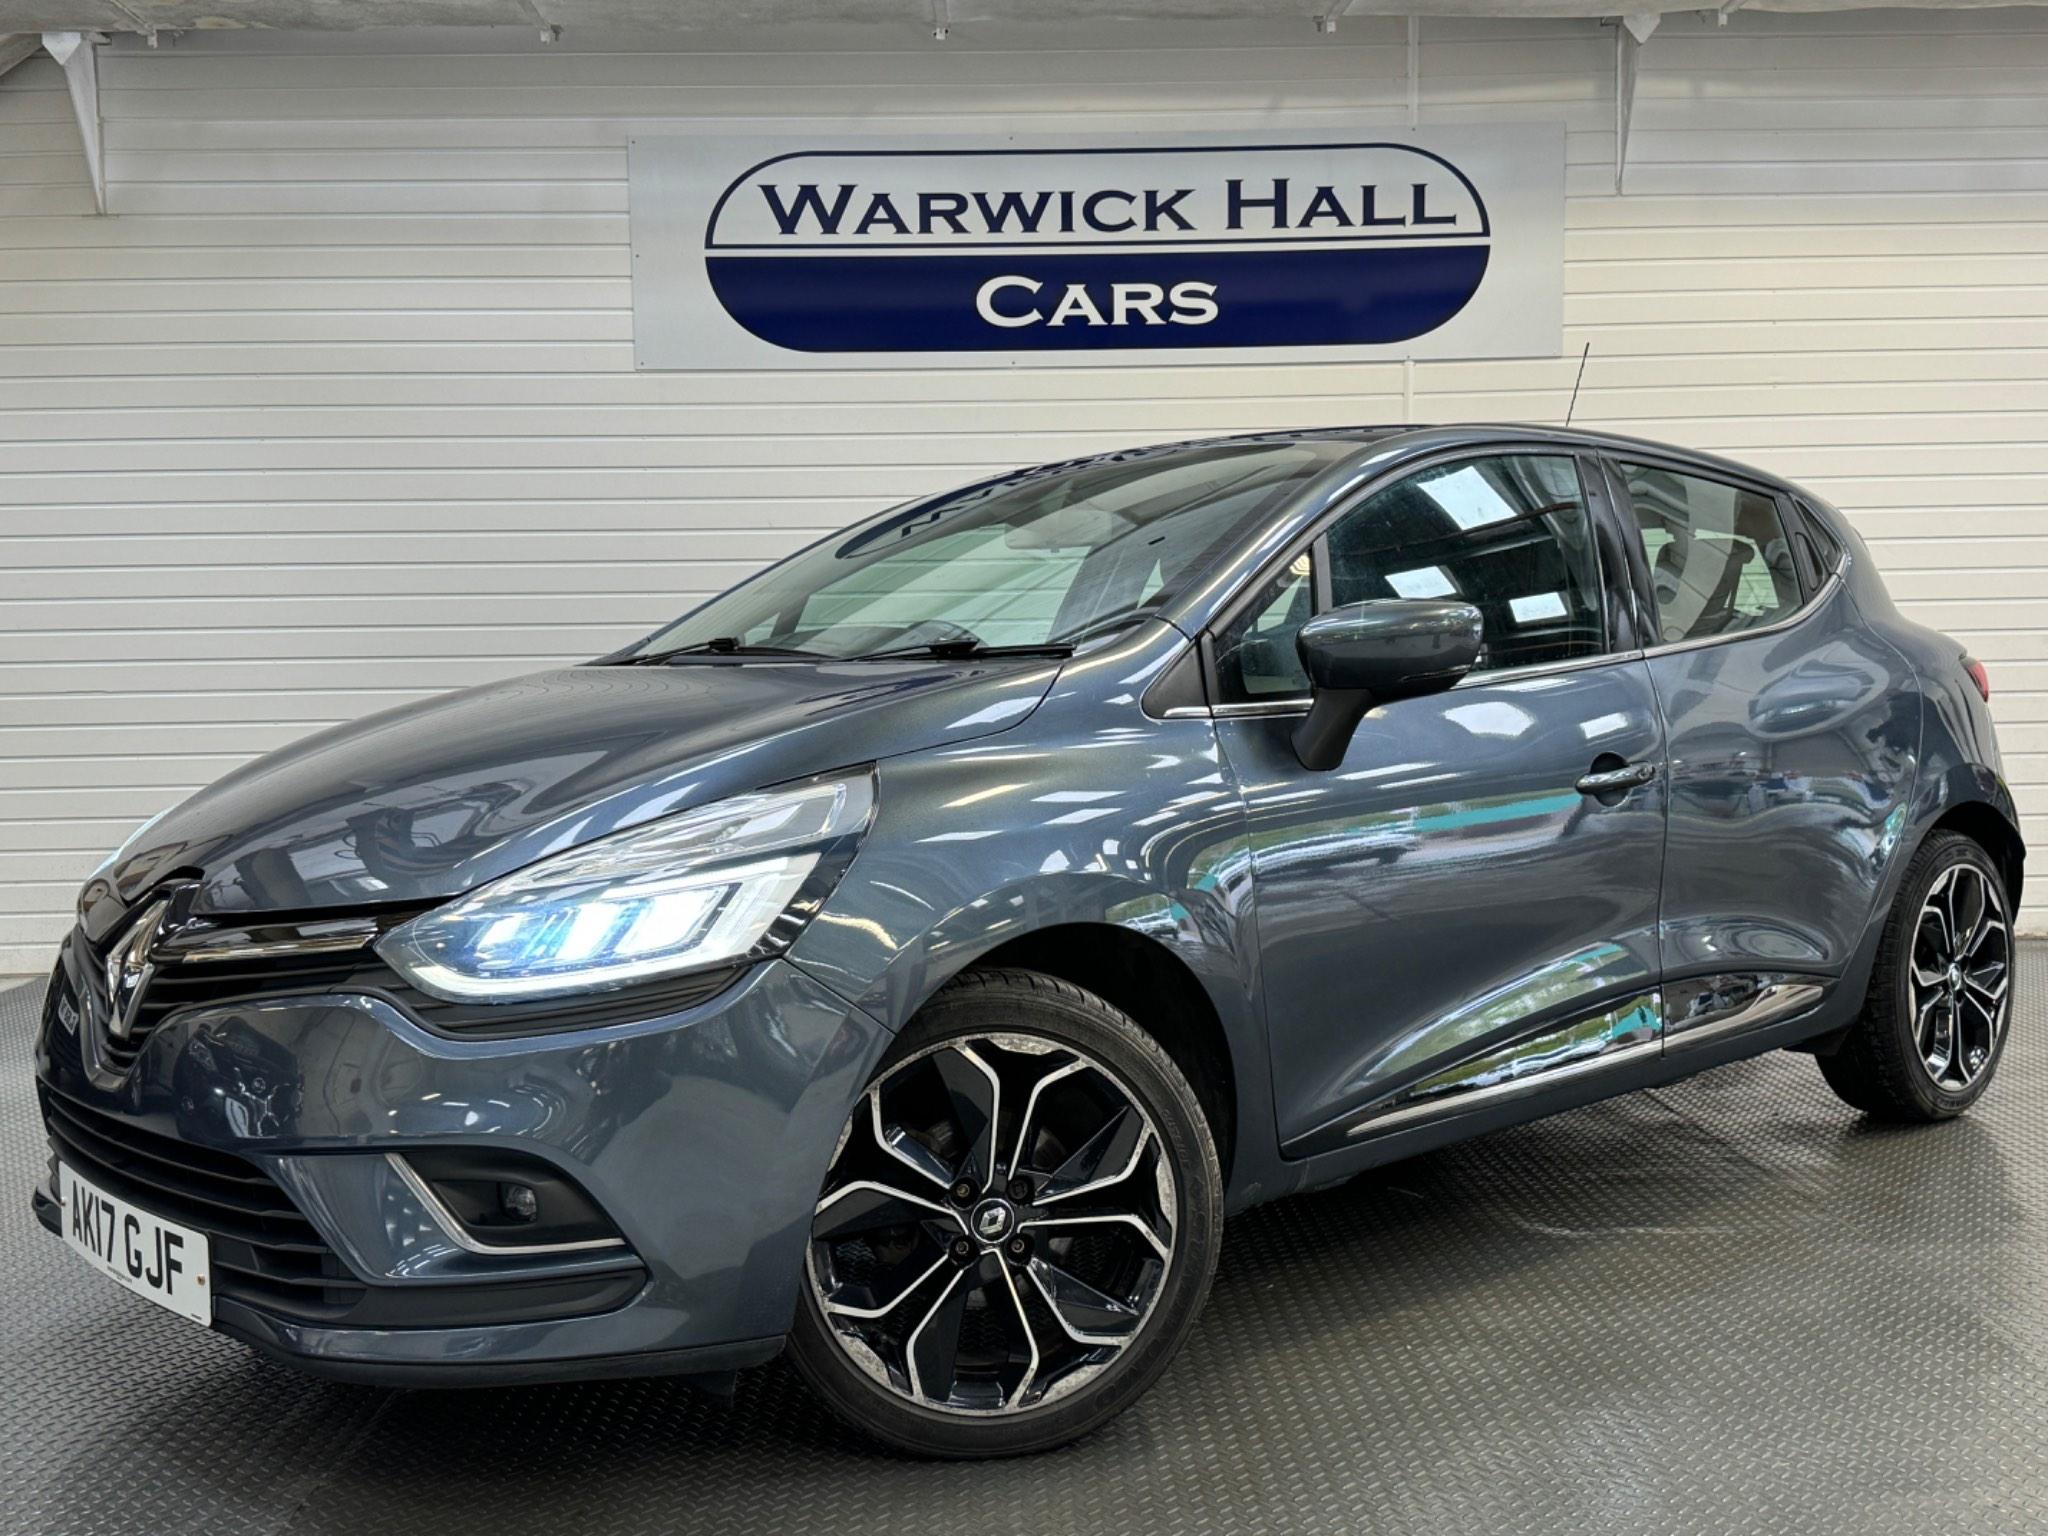 Renault Clio 1.5 dCi Dynamique S Nav Euro 6 (s/s) 5dr For Sale in Greater Manchester